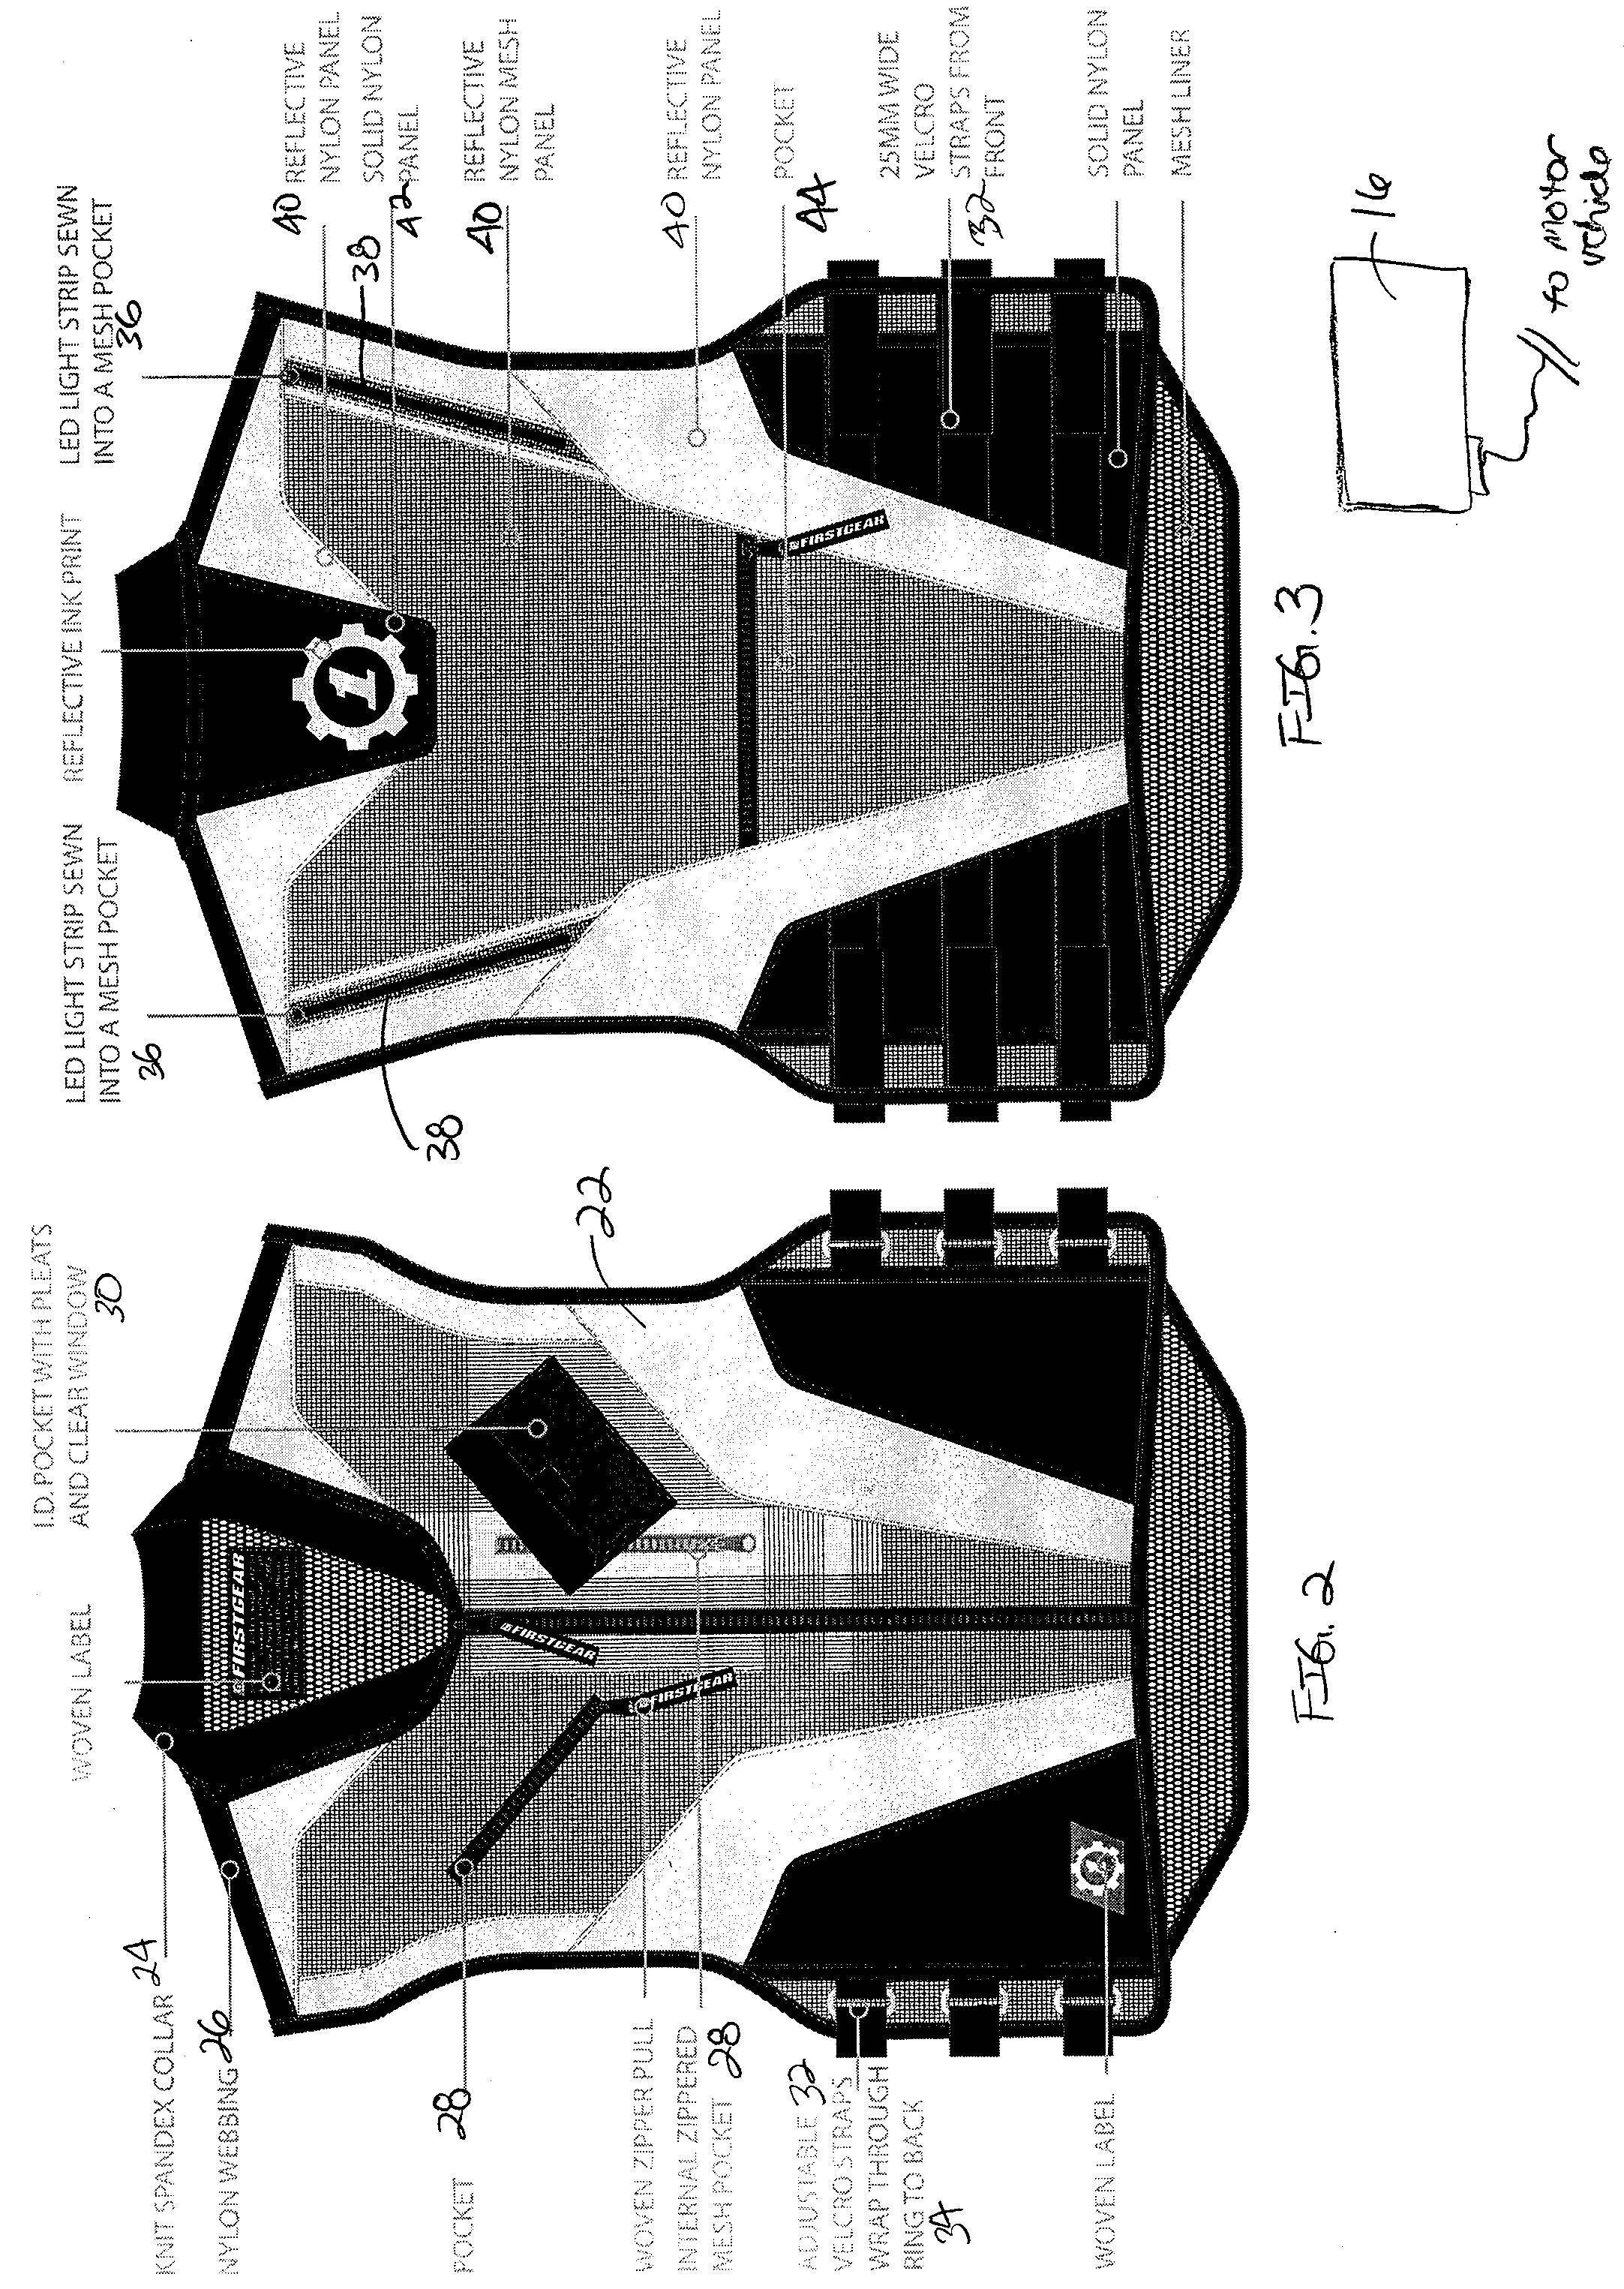 Safety system utilizing lighting incorporated into apparel